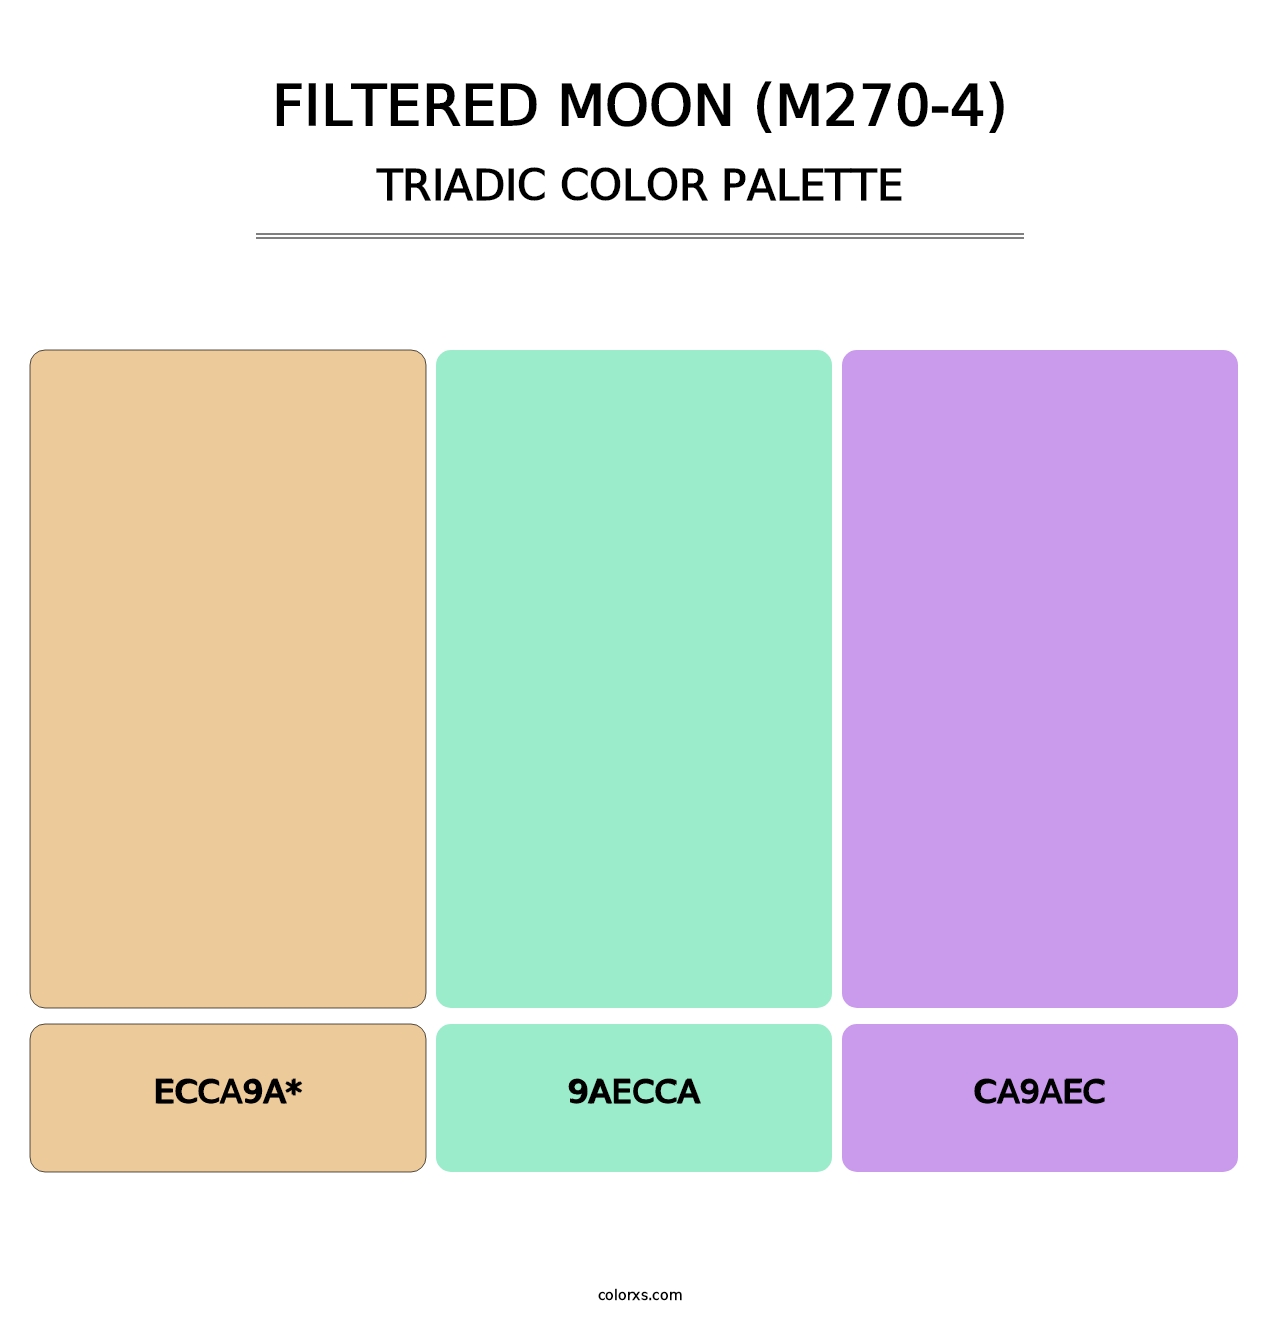 Filtered Moon (M270-4) - Triadic Color Palette